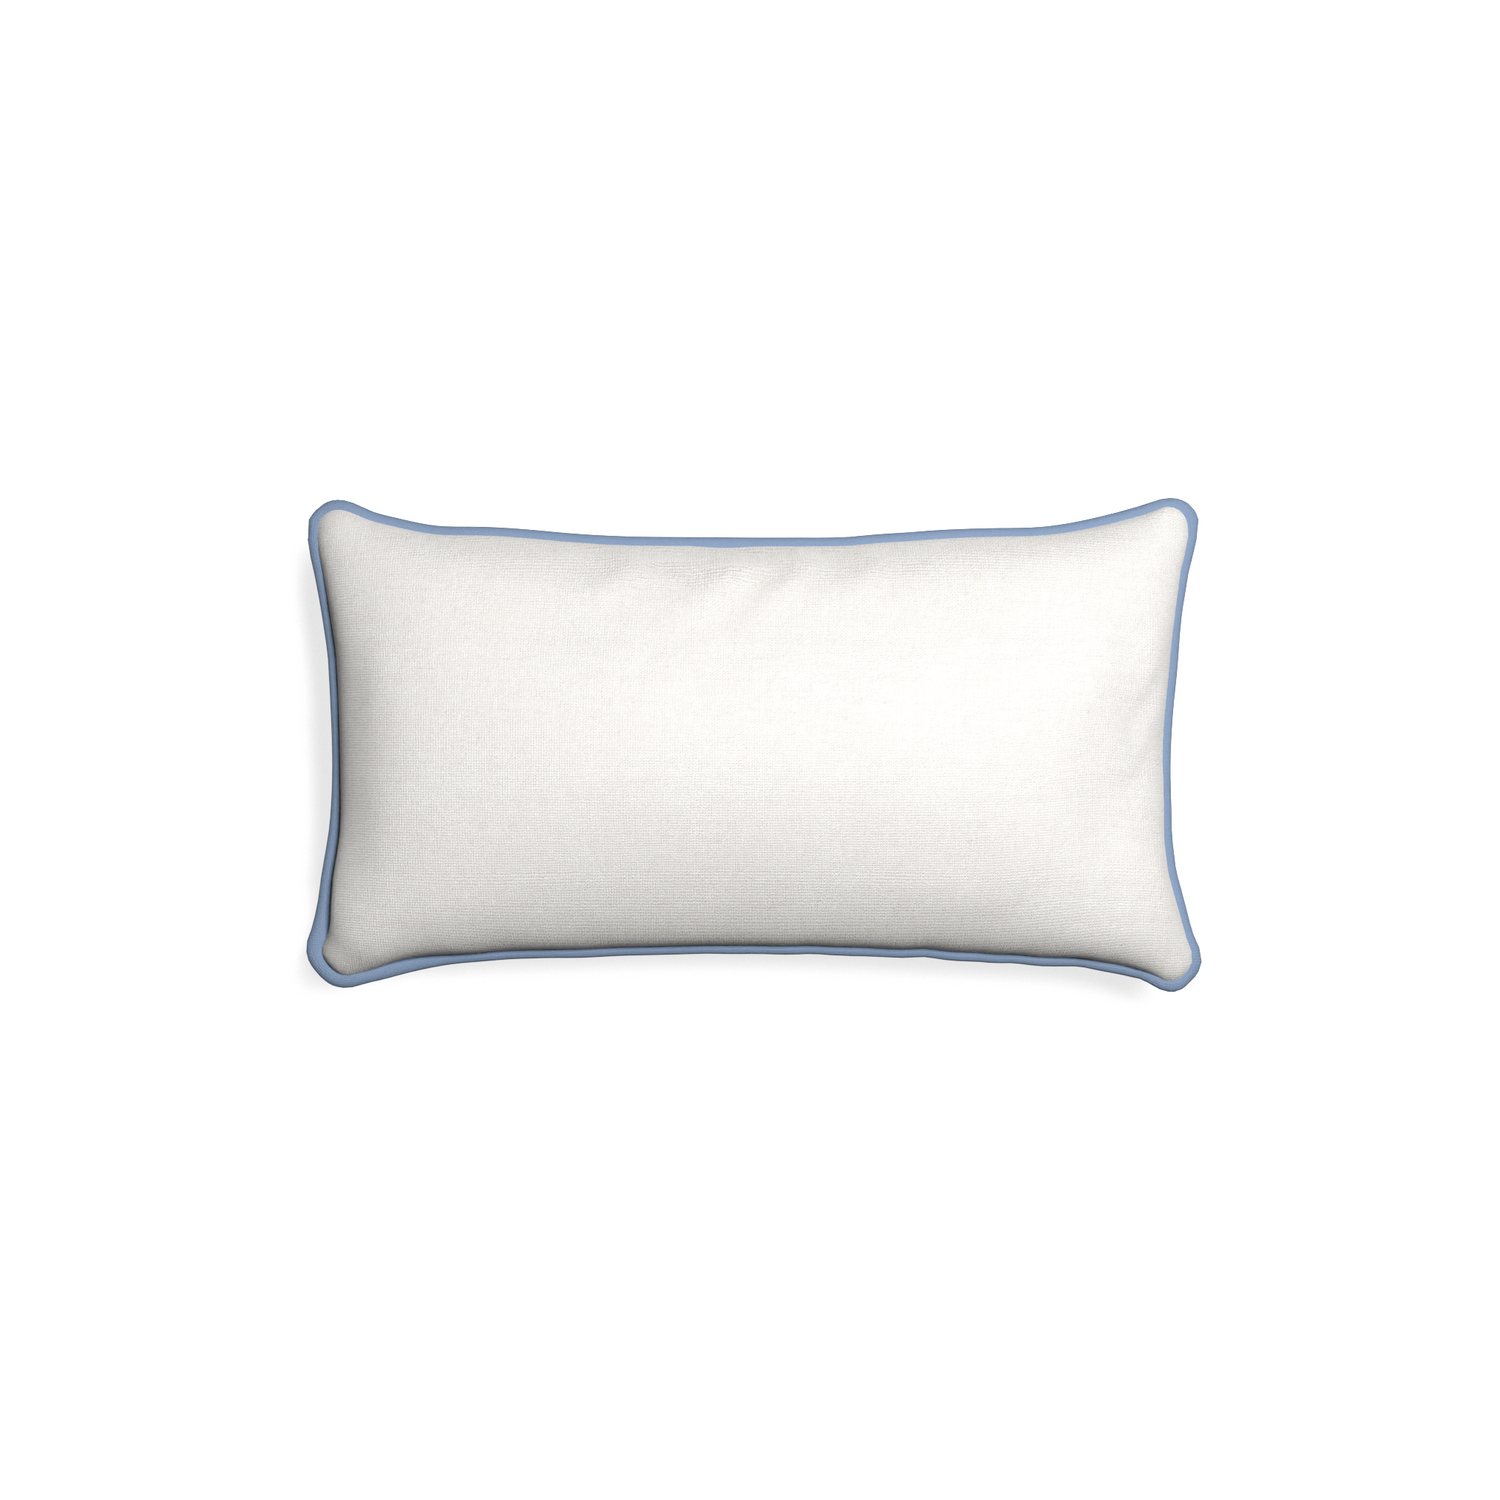 Petite-lumbar flour custom natural whitepillow with sky piping on white background